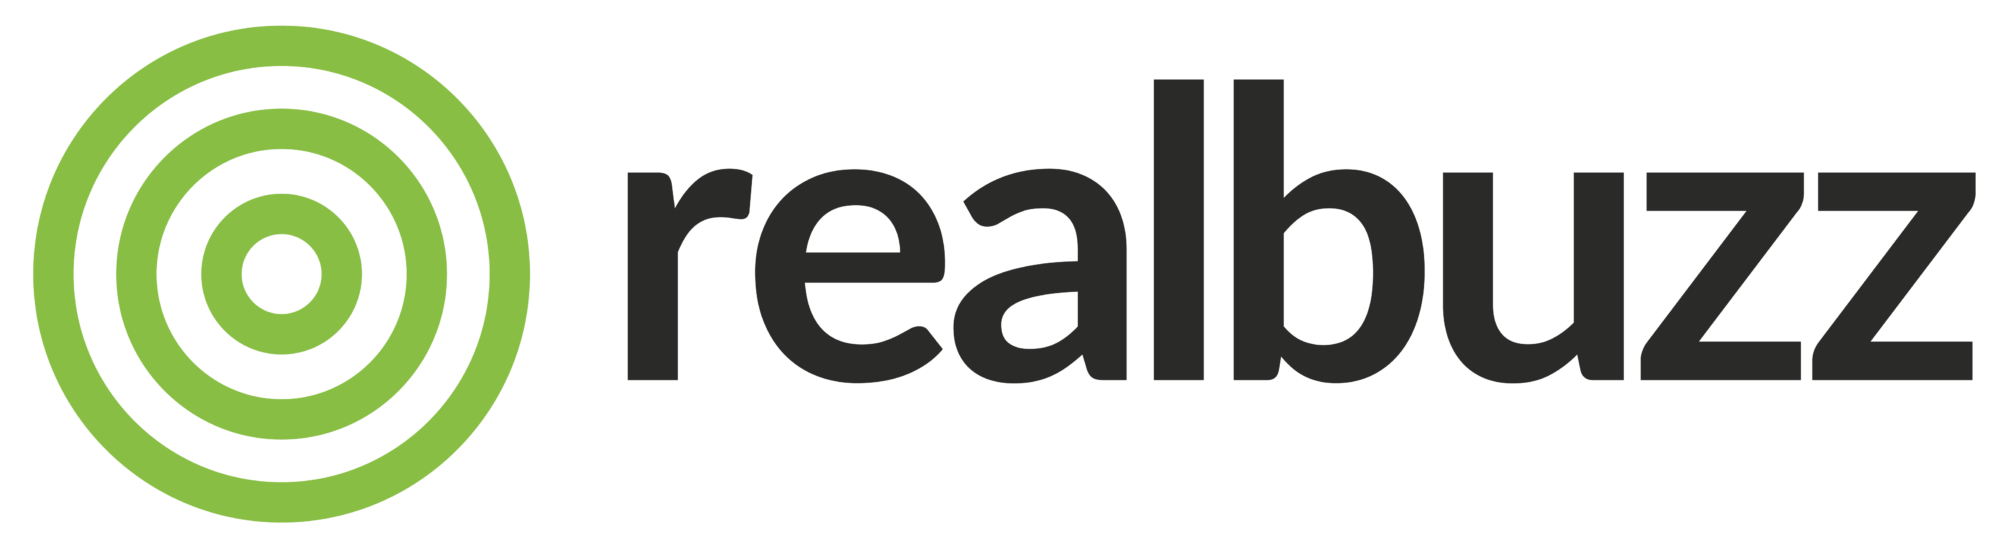 A green circular target logo followed by the word "realbuzz" in black, written in lowercase letters with a modern sans-serif font.